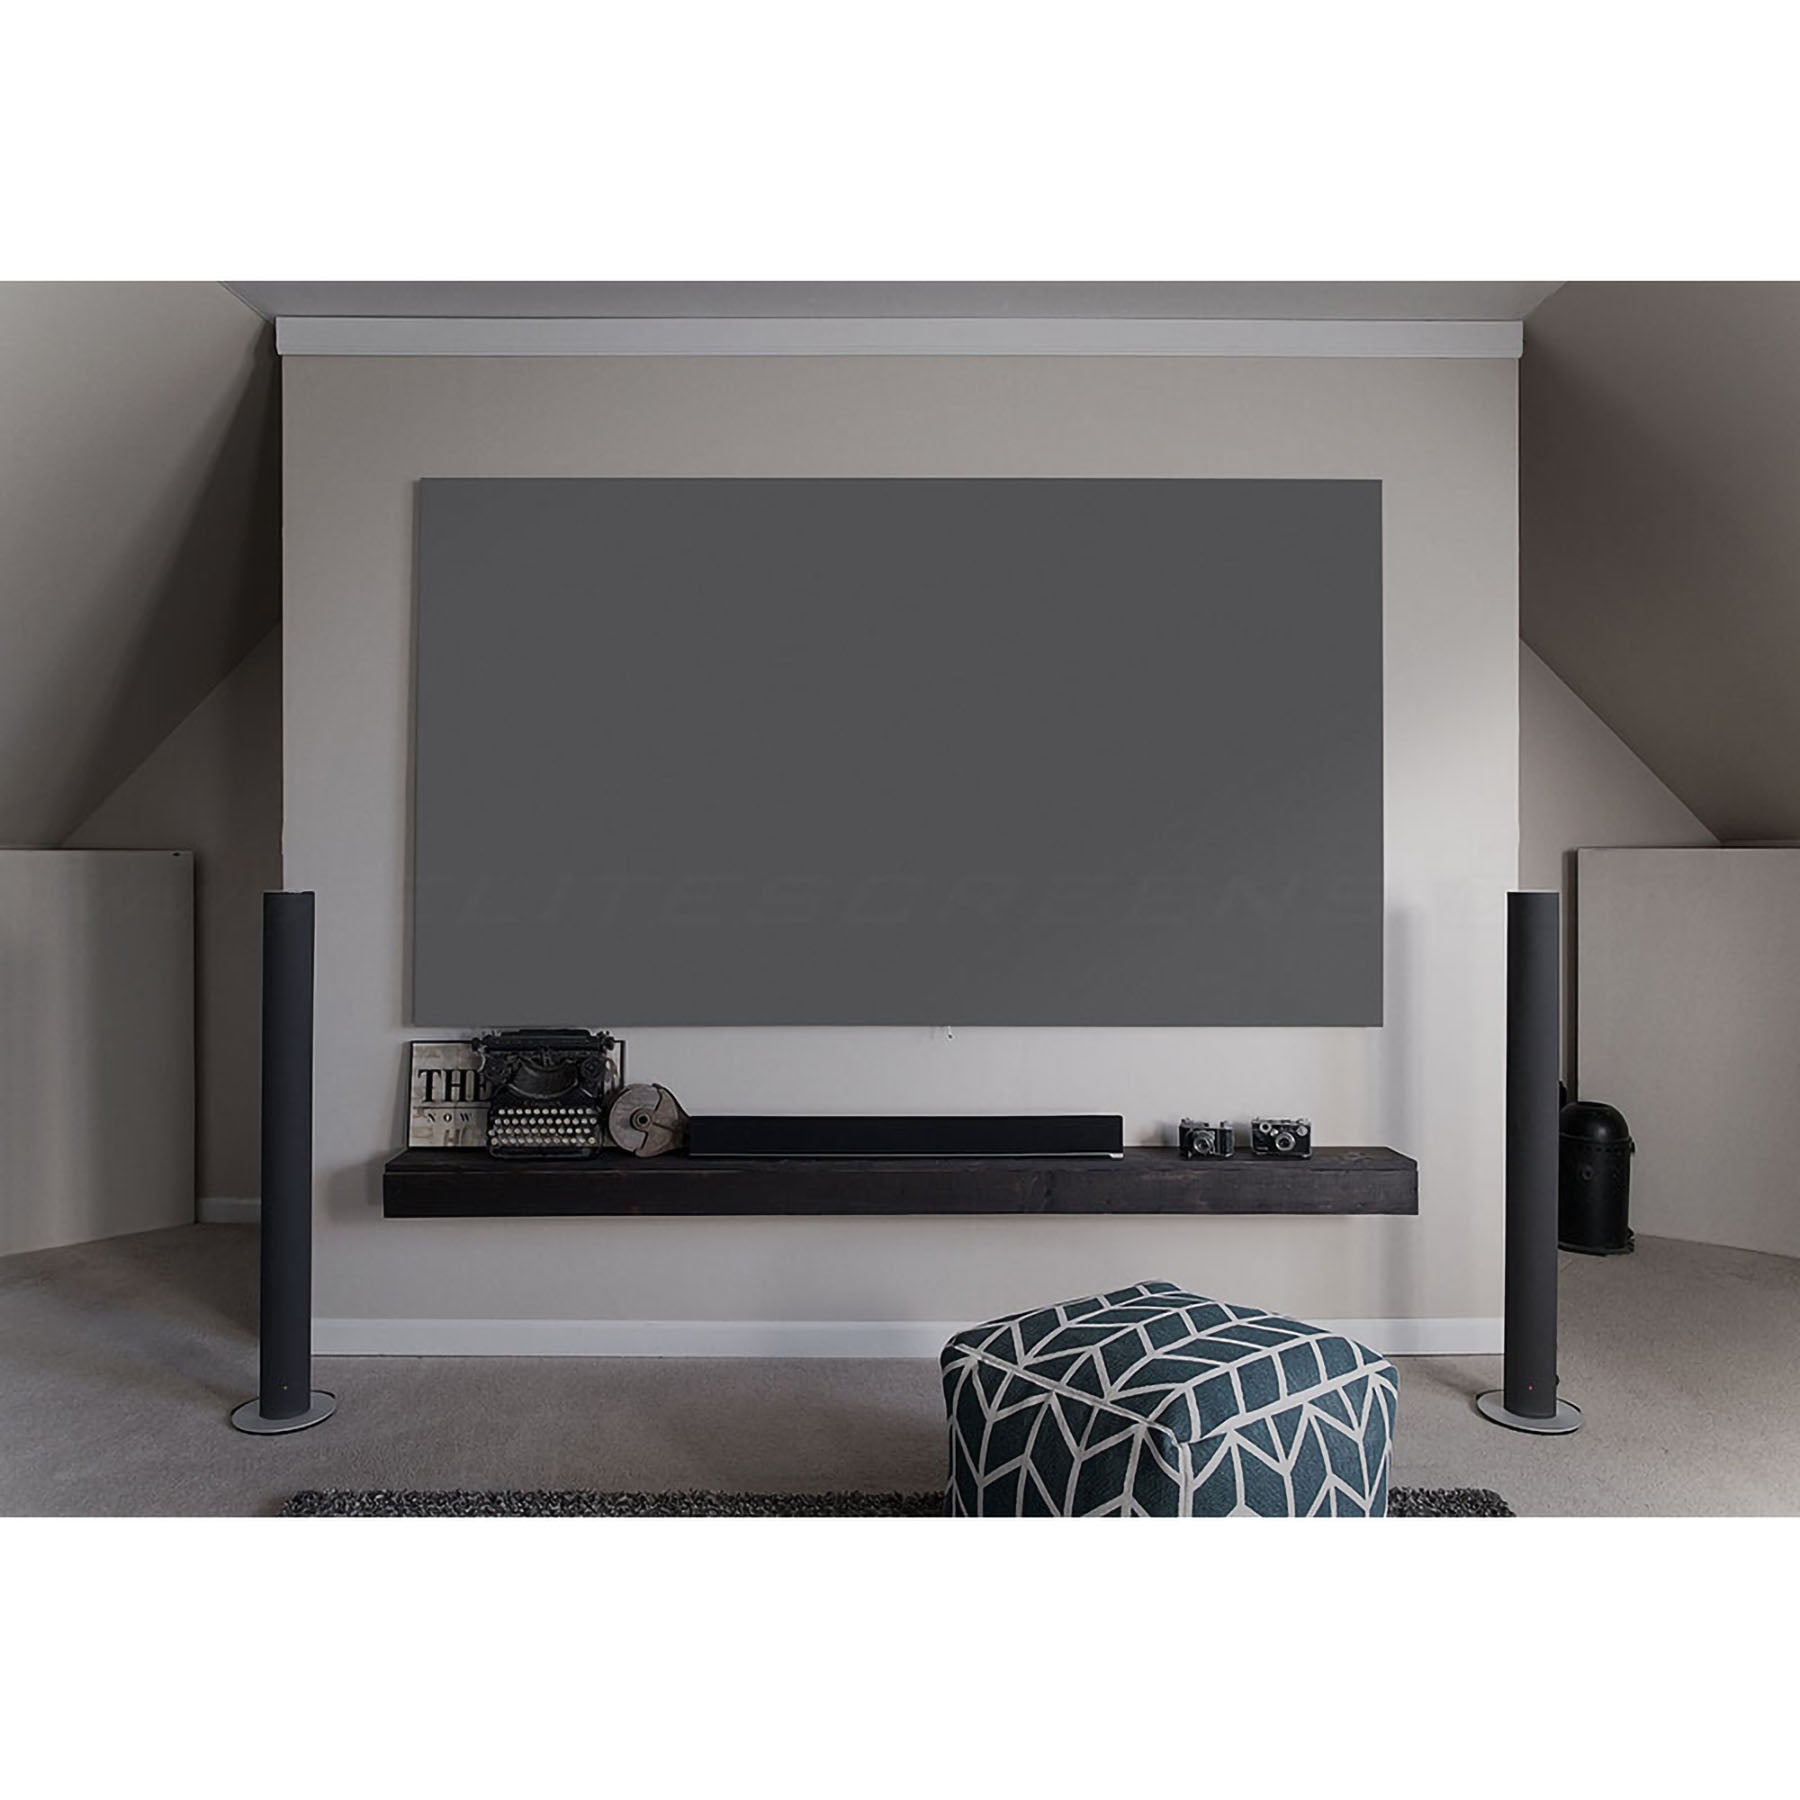 Elite Screens AR100DHD3 Aeon CineGrey 3D 100" 16:9 4K Fixed Screen with Edge Free Frame & Ambient Light Rejecting